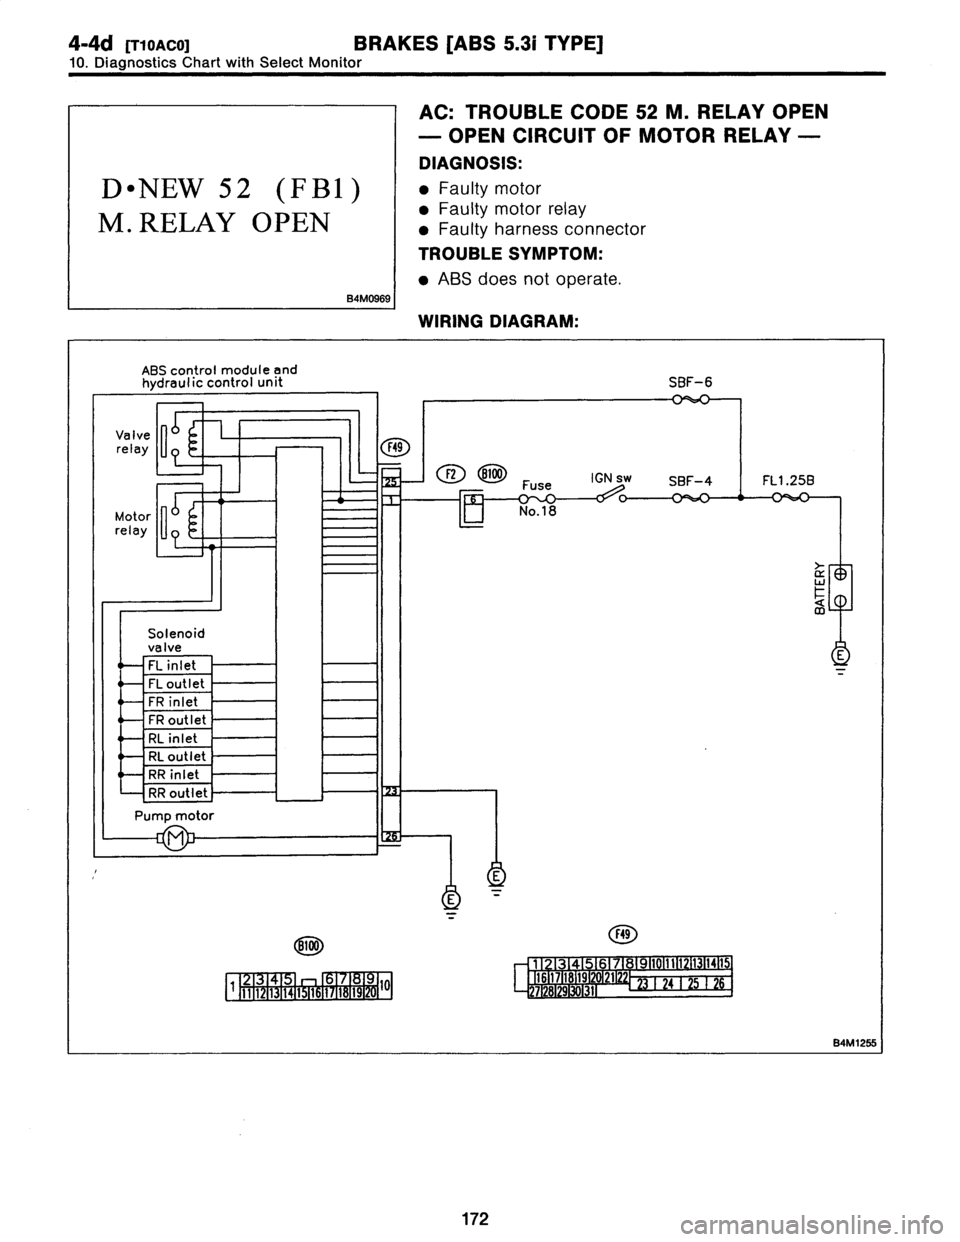 SUBARU LEGACY 1997  Service Owners Guide 
4-4d
[T1oaco1
BRAKES
[ABS
5
.31
TYPE]

10
.
Diagnostics
Chart
with
Select
Monitor

D
"
NEW
52
(FBI)

M
.
RELAY
OPEN

B4M0969

AC
:
TROUBLE
CODE
52
M
.
RELAY
OPEN

-
OPEN
CIRCUIT
OF
MOTOR
RELAY
-
